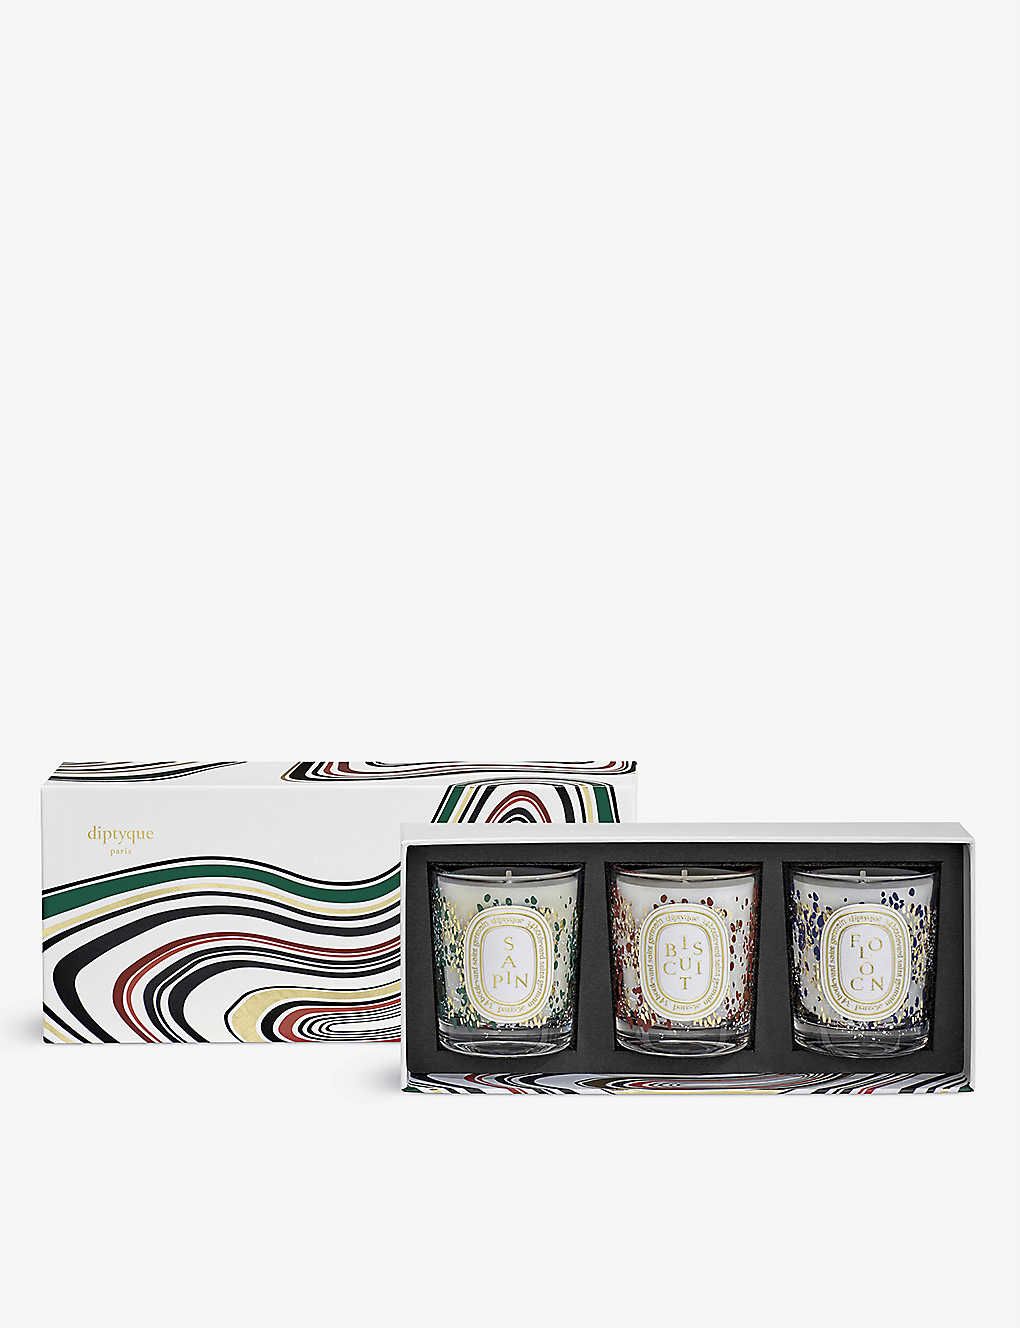 Scented candle limited-edition gift set | Selfridges